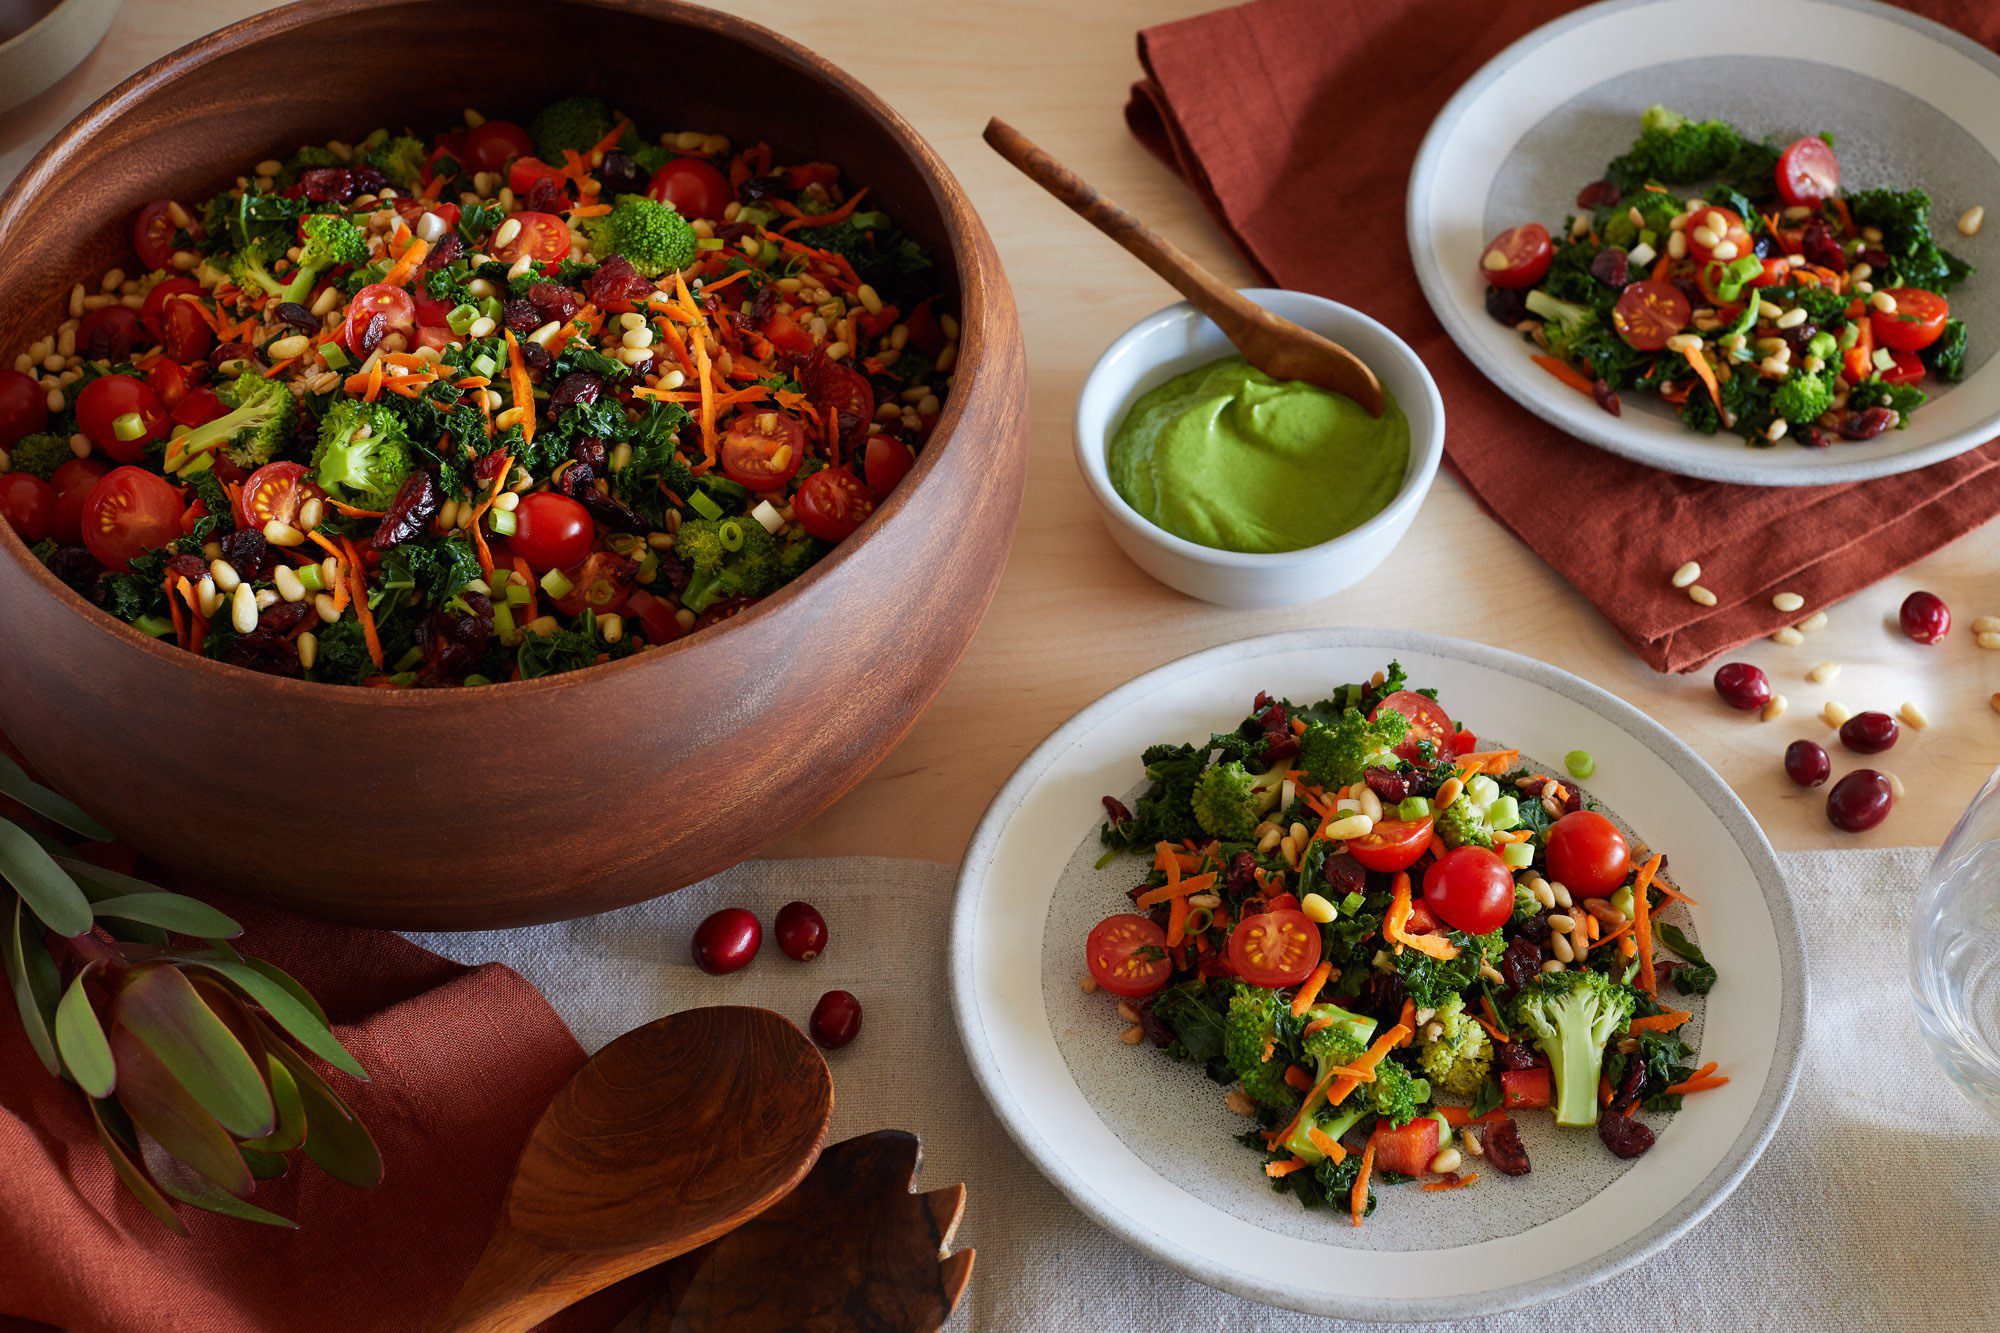 A large bowl of kale salad set alongside a plate with kale salad and a bowl with green avocado dressing